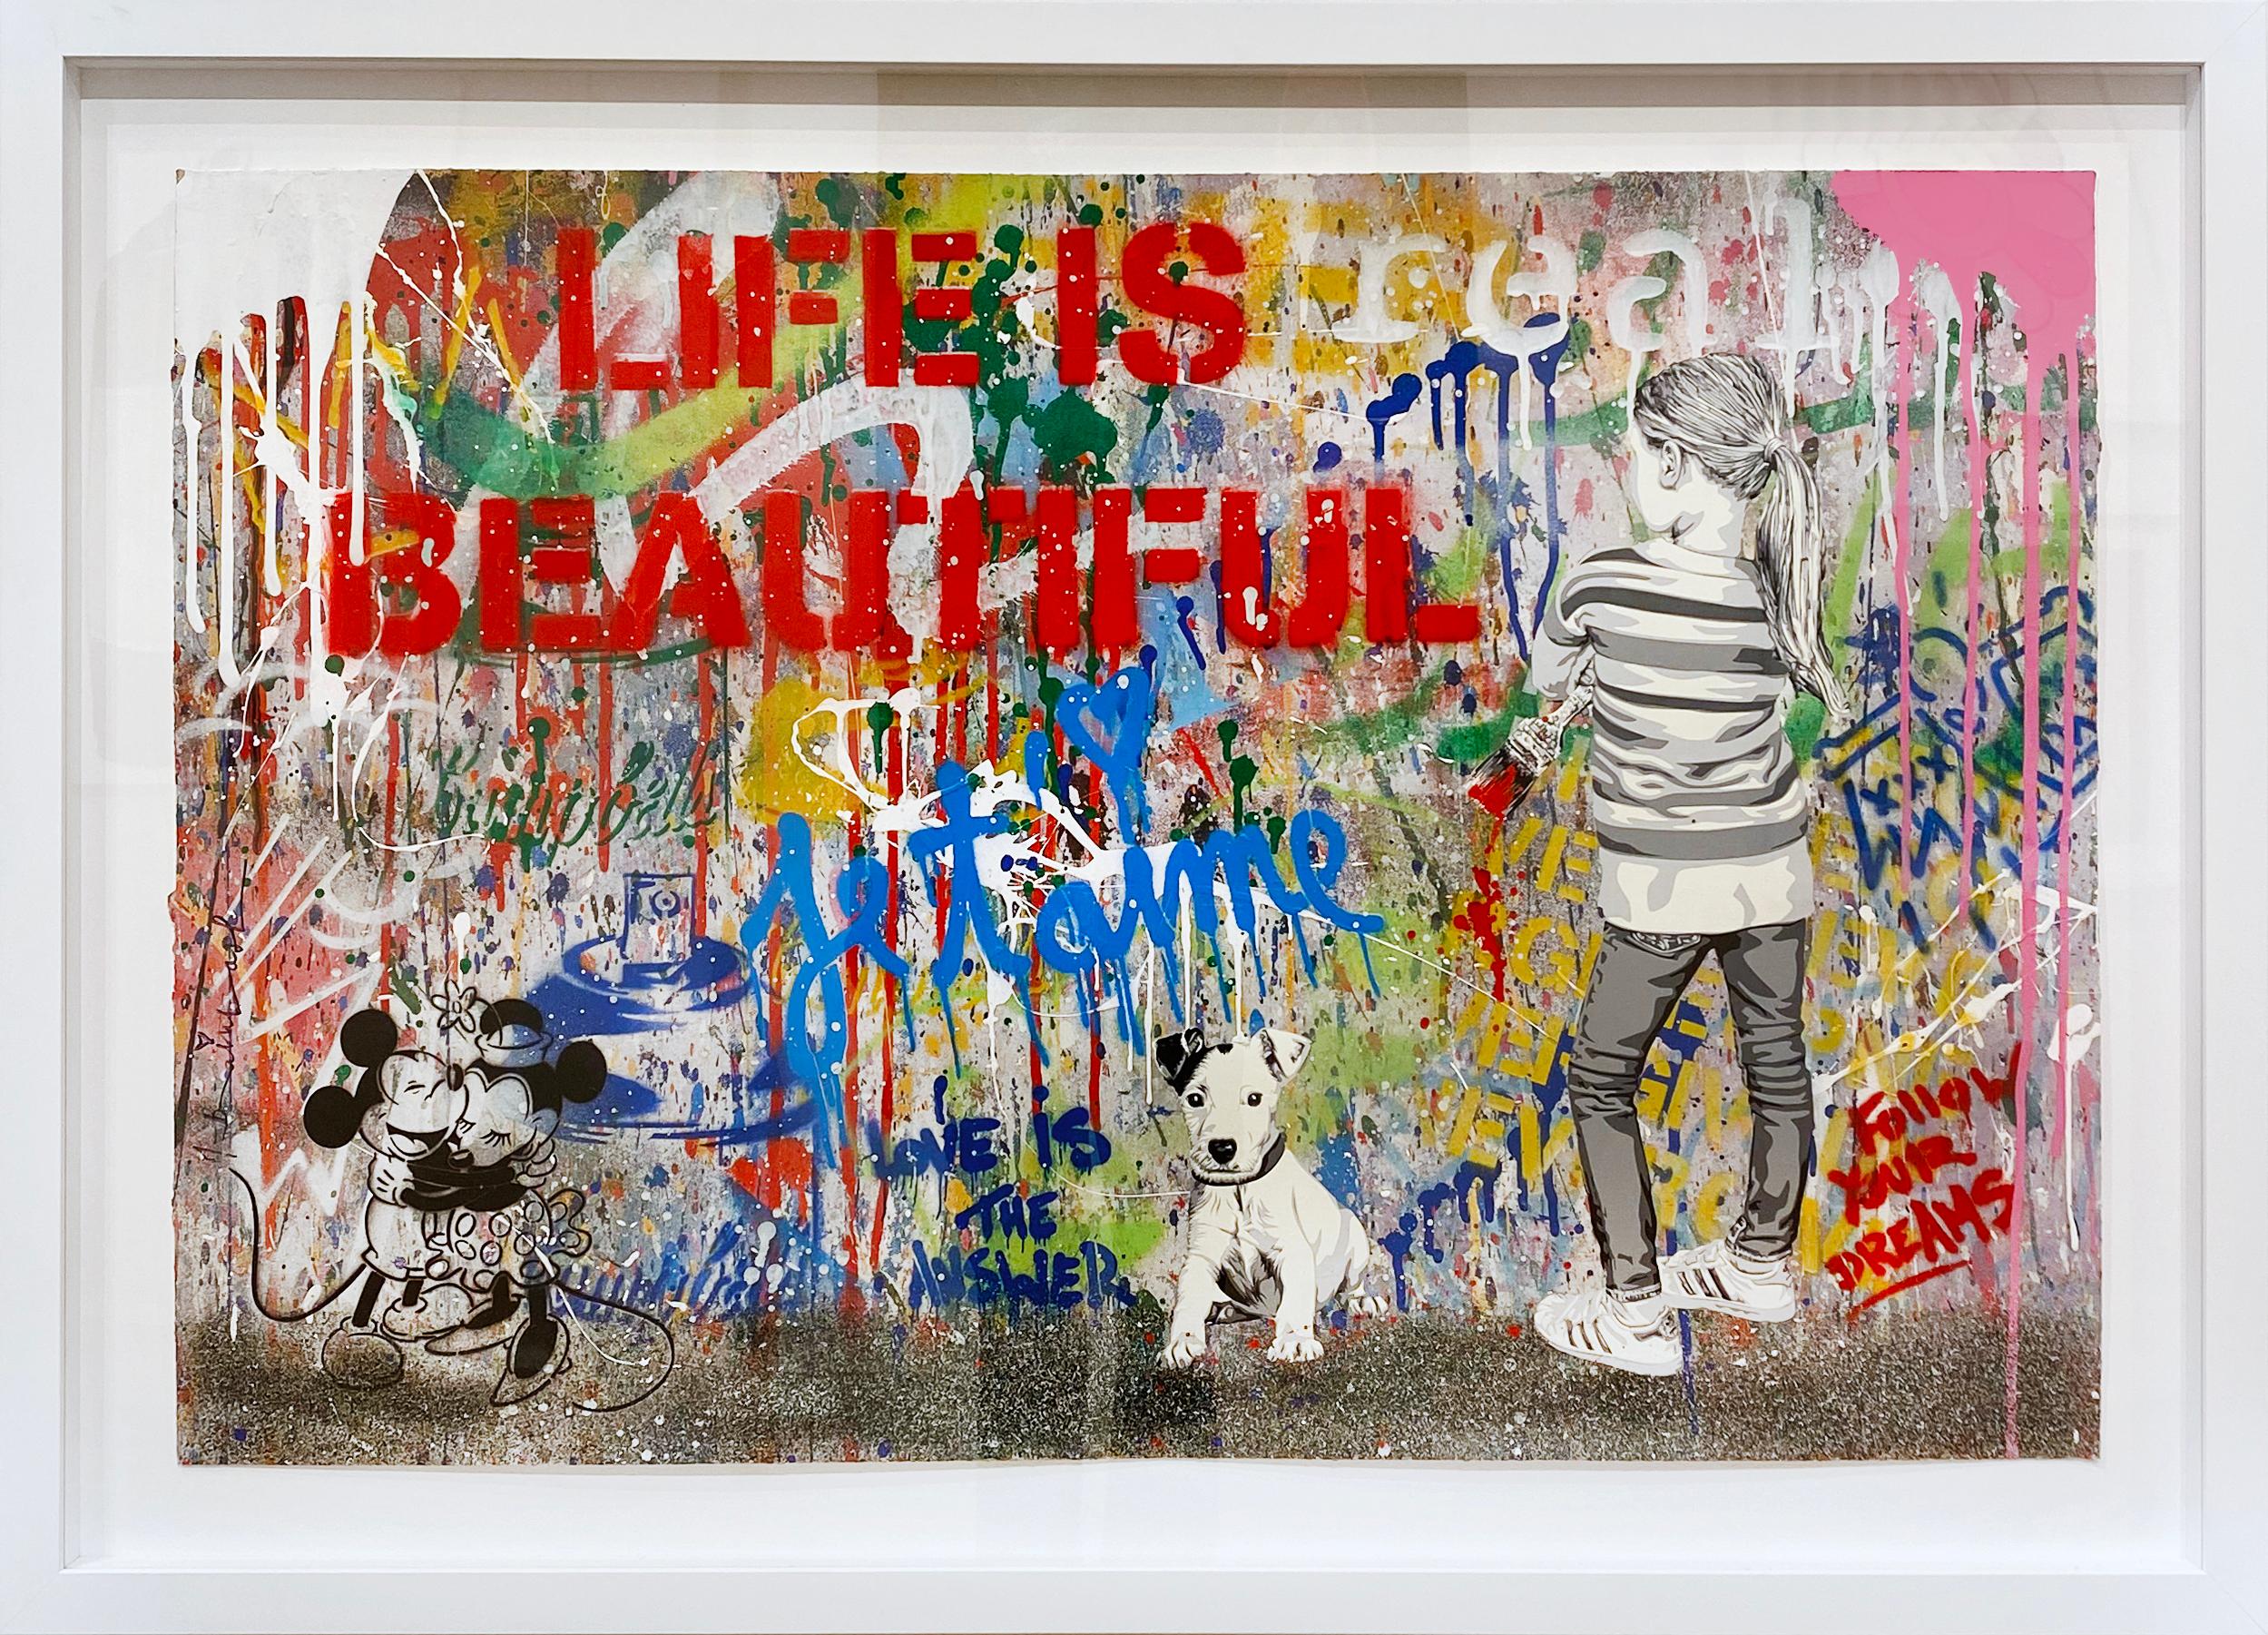 Express Yourself - Mixed Media Art by Mr. Brainwash